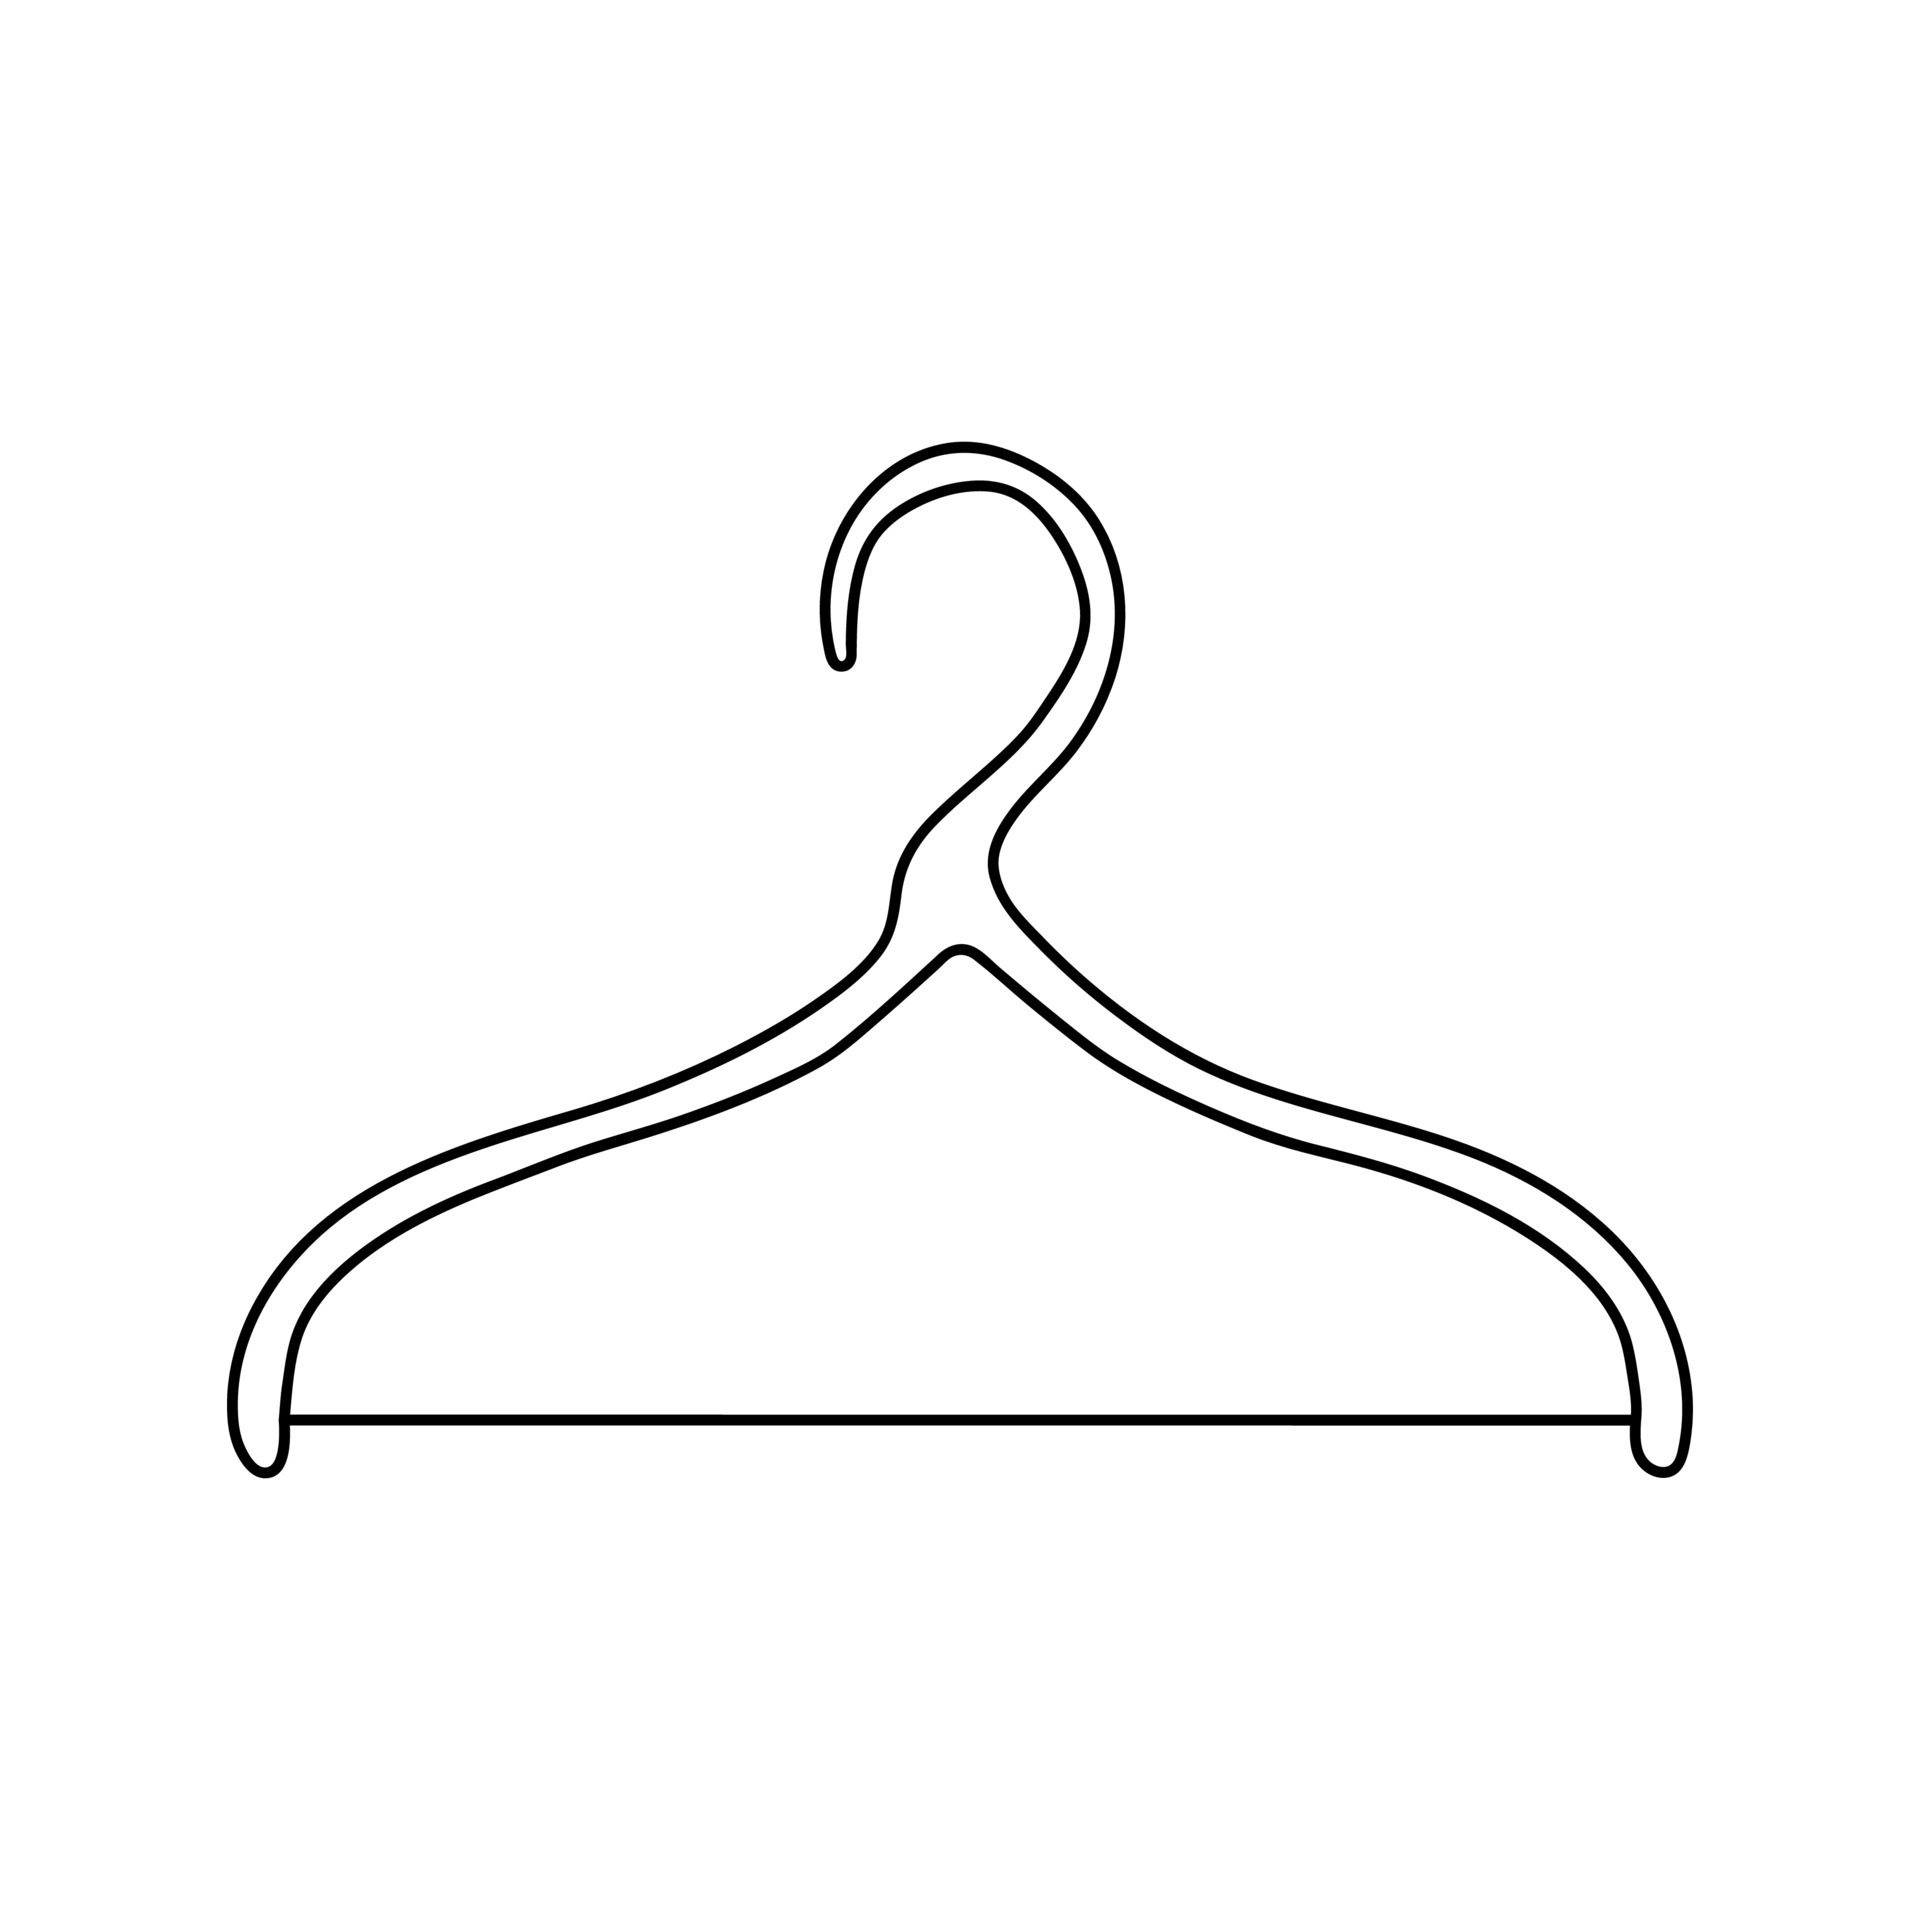 https://static.vecteezy.com/system/resources/previews/017/293/687/original/hand-drawn-doodle-hanger-sales-shopping-clipart-hanger-for-wardrobe-clothes-service-dressing-room-cloakroom-laundry-symbol-isolated-on-white-background-vector.jpg